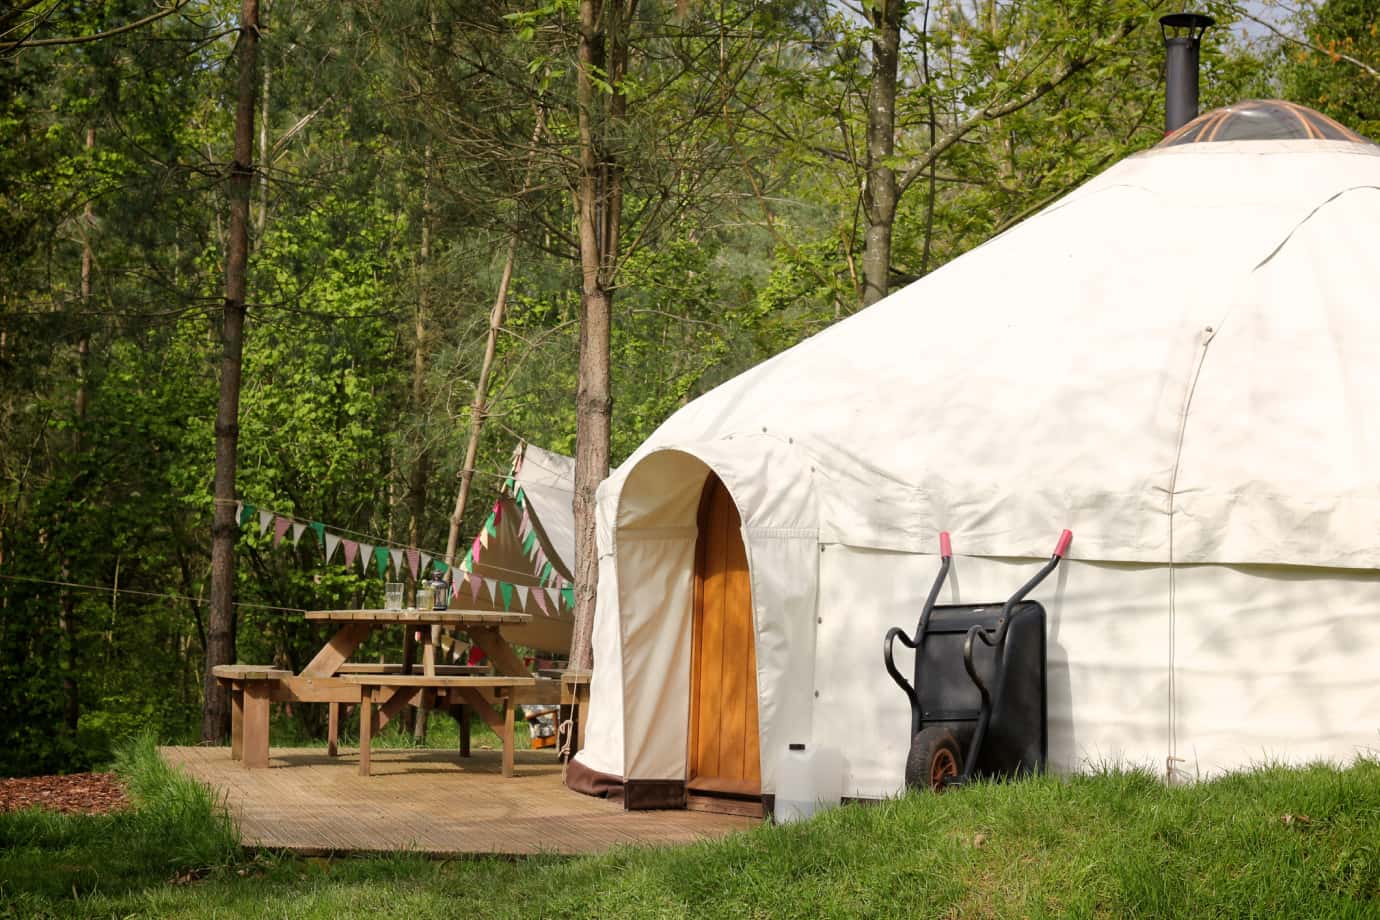 A yurt used for glamping in style in a forest